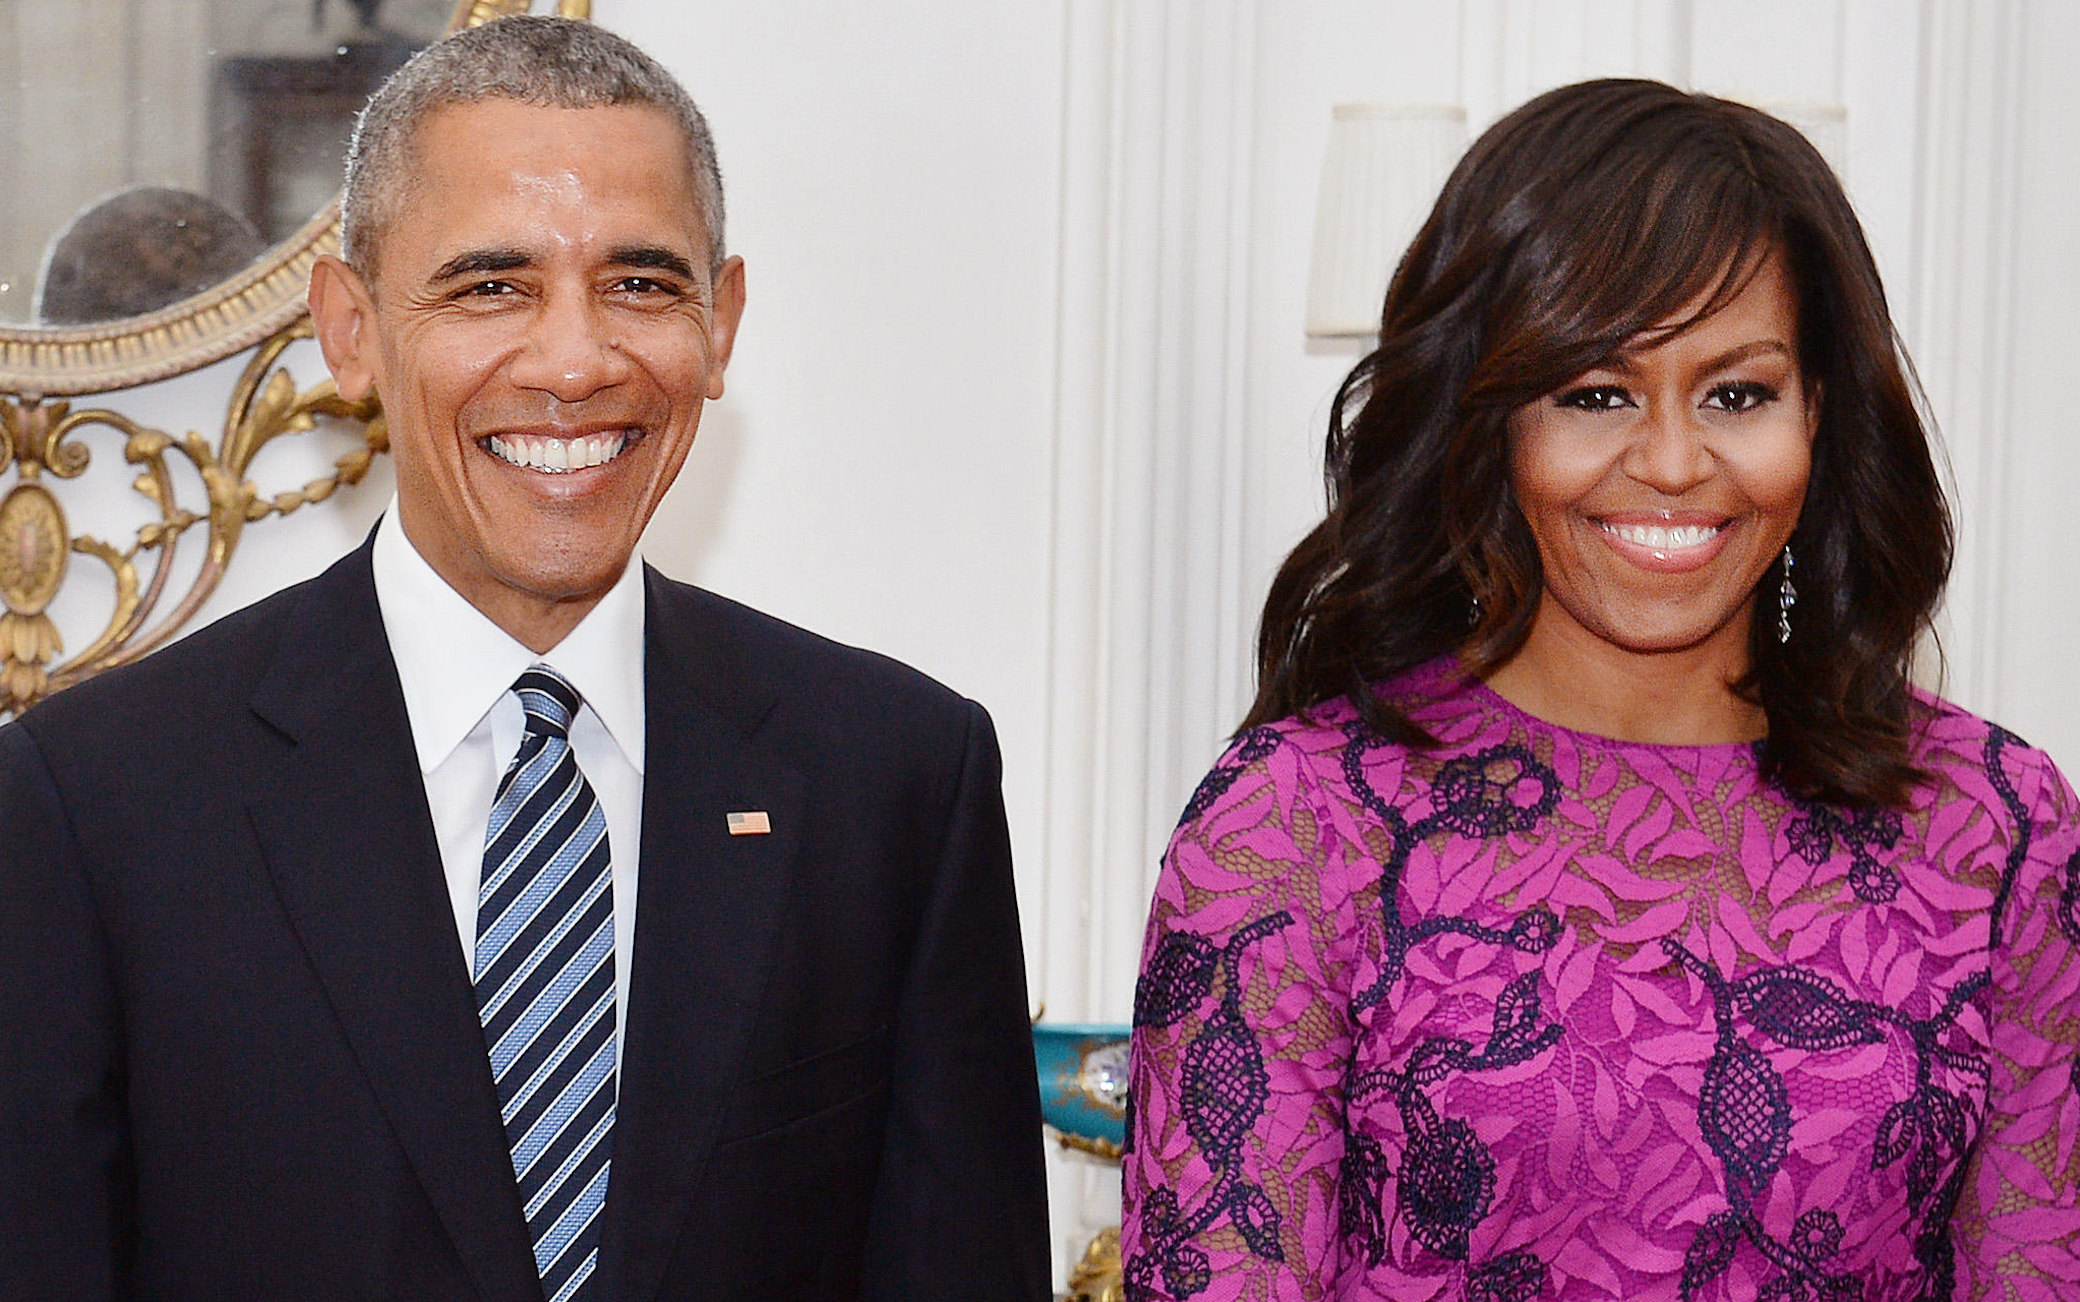 Barack and Michelle Obama produce TV series, New TV Movies, and Documentary Series on Netflix